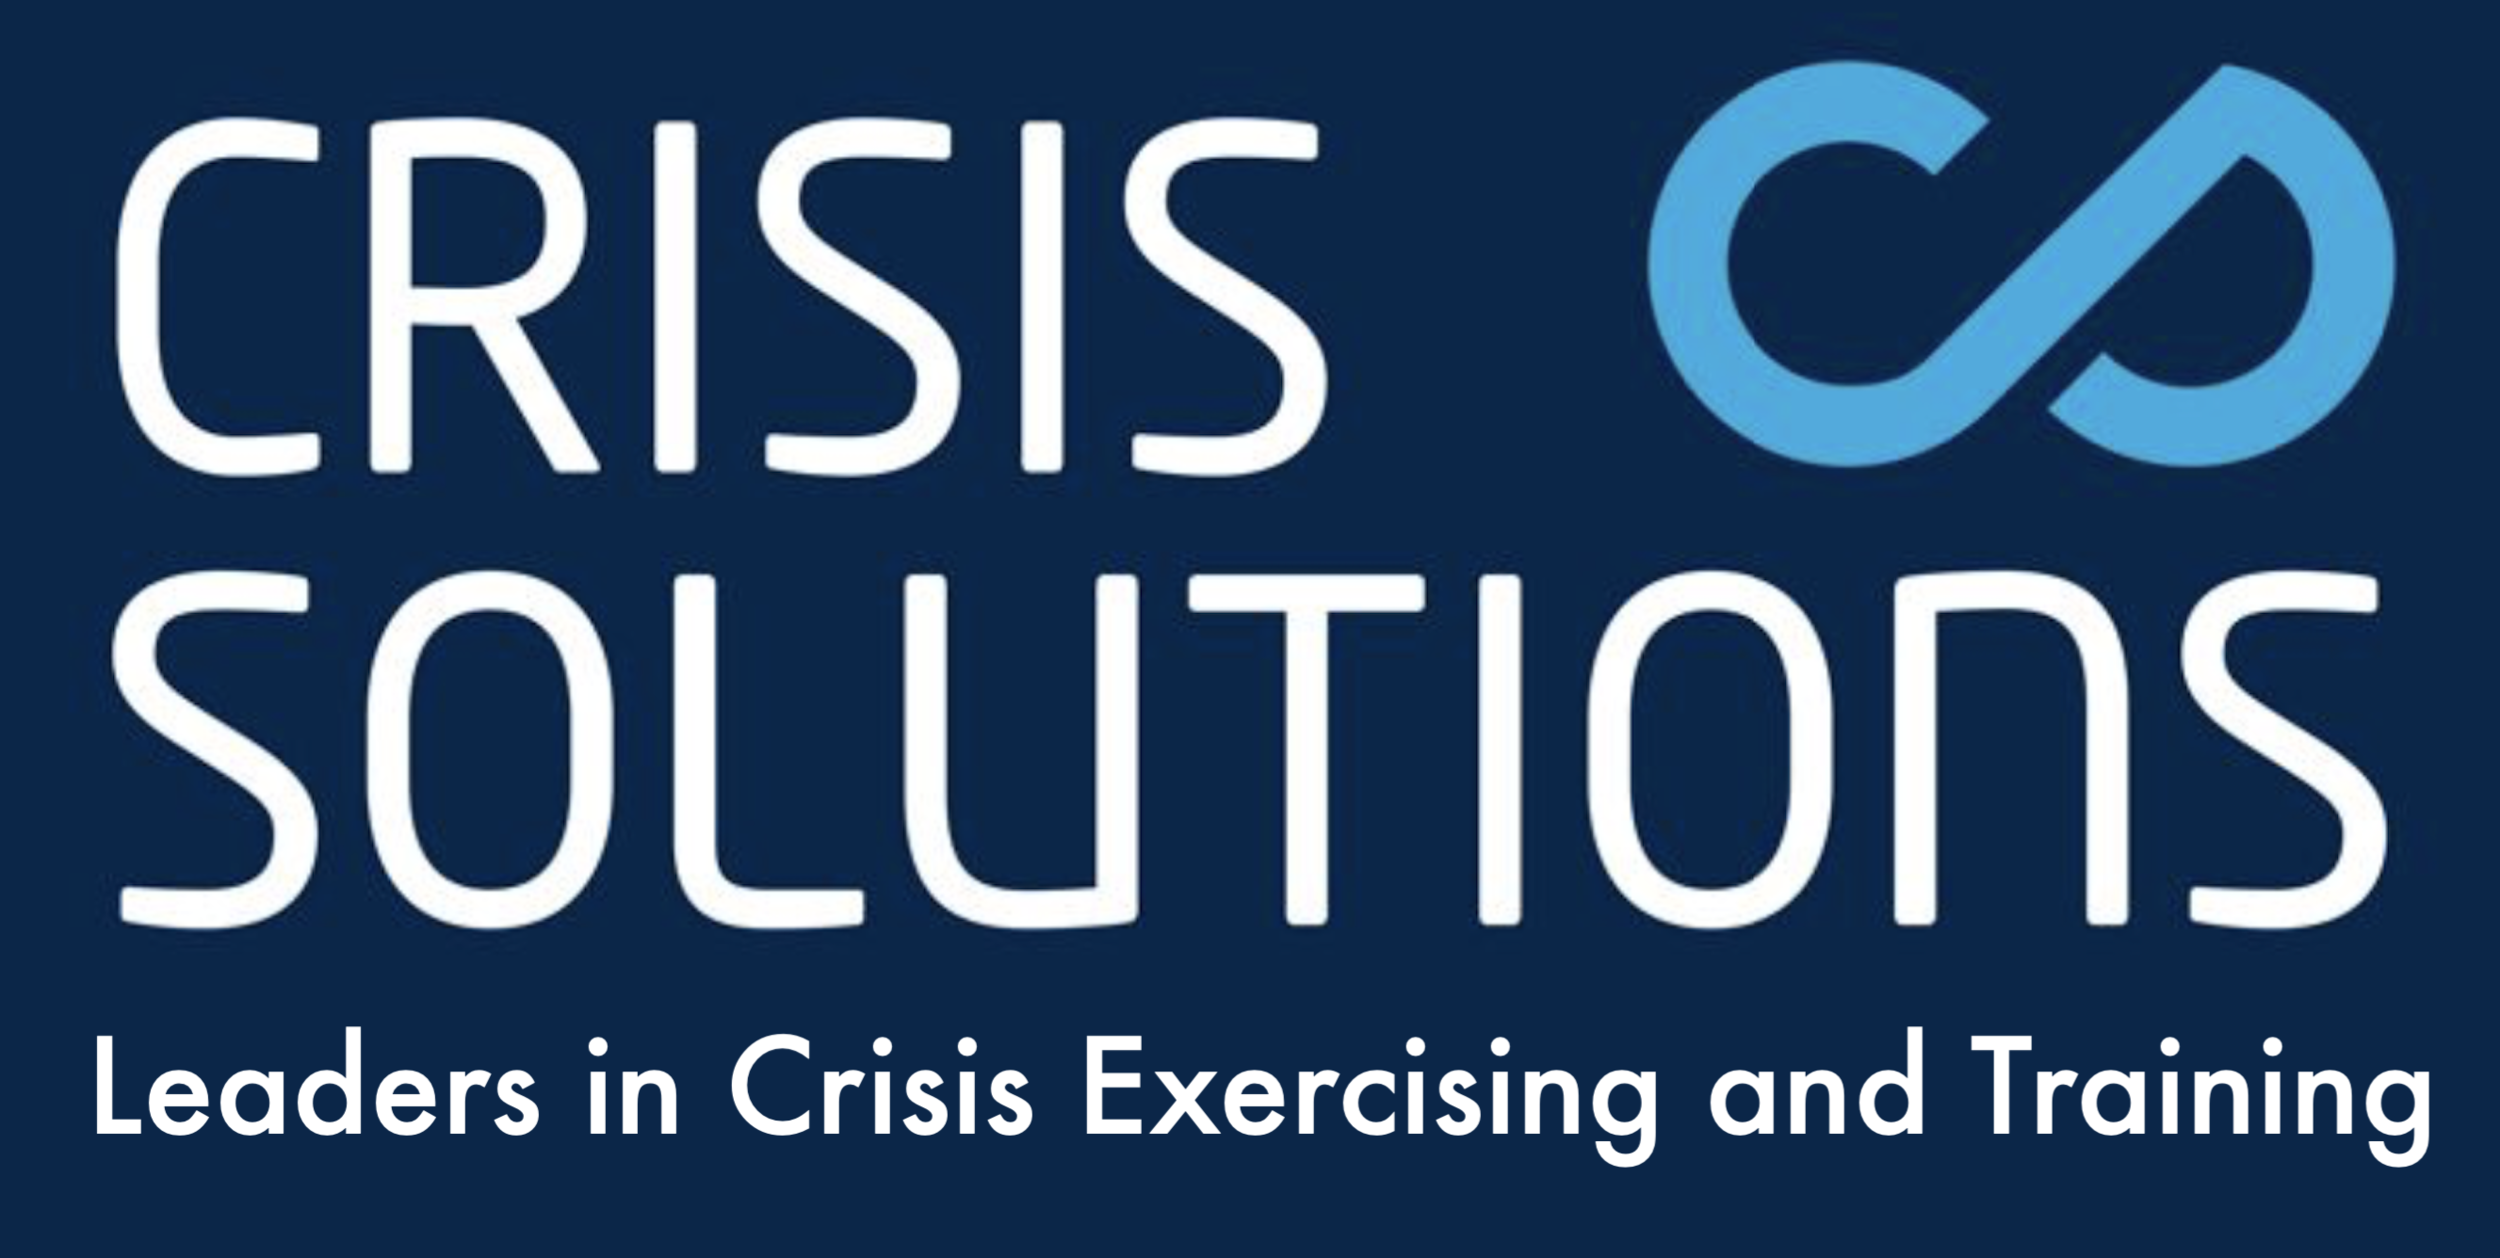 Crisis Solutions Leaders in Crisis Exercising and Training